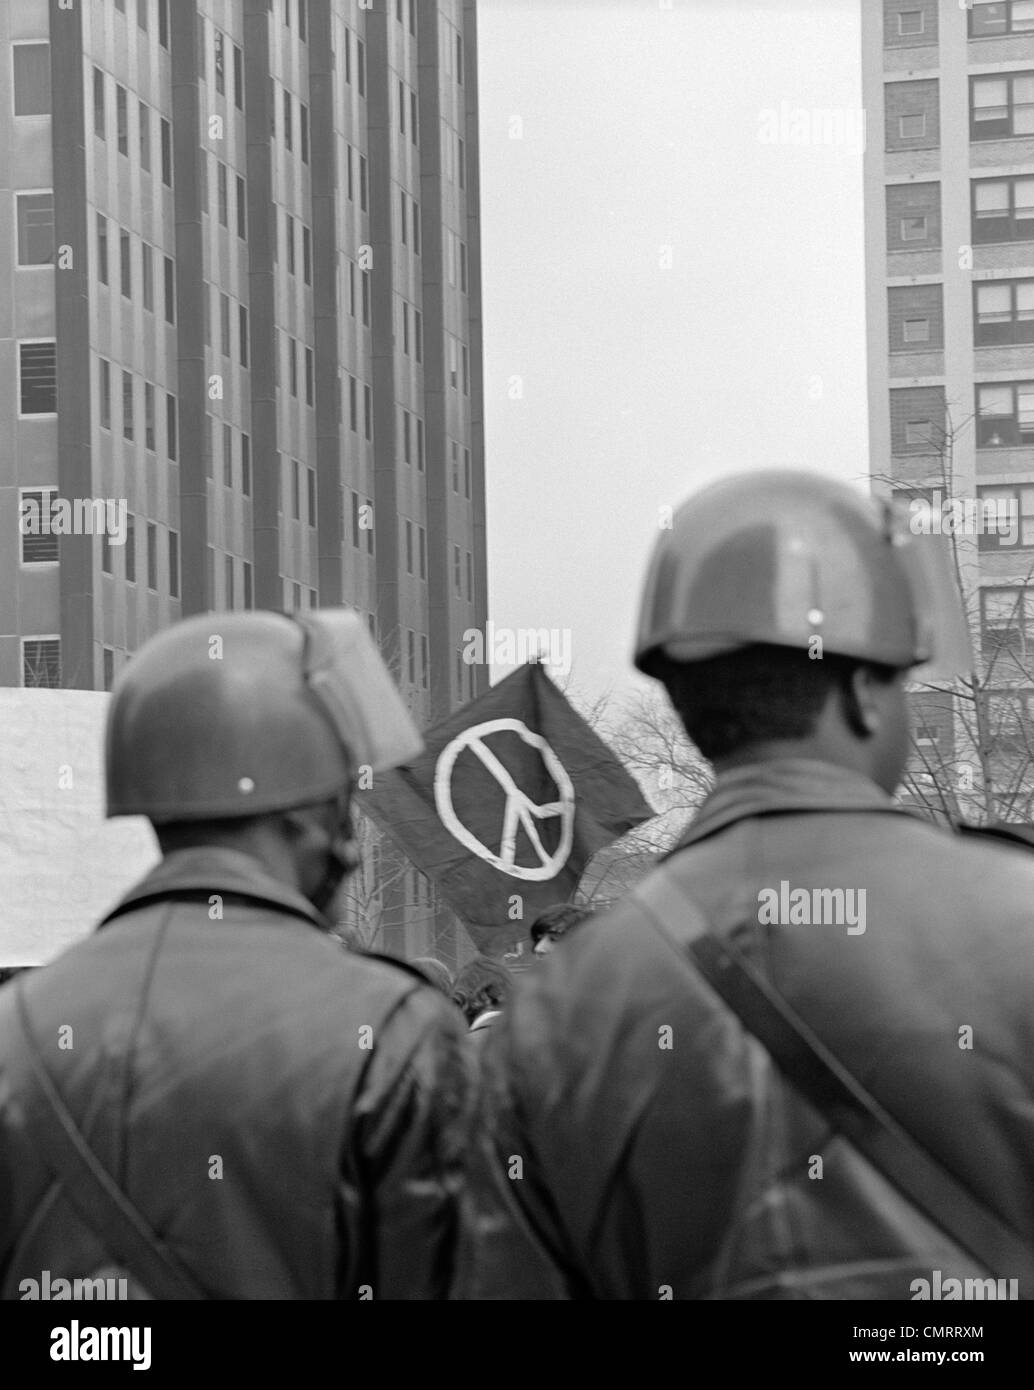 1970s BACK VIEW OF TWO POLICEMAN IN HELMETS AT DEMONSTRATION WITH PEACE SIGN IN BACKGROUND FRAMED BETWEEN THEIR HEADS Stock Photo